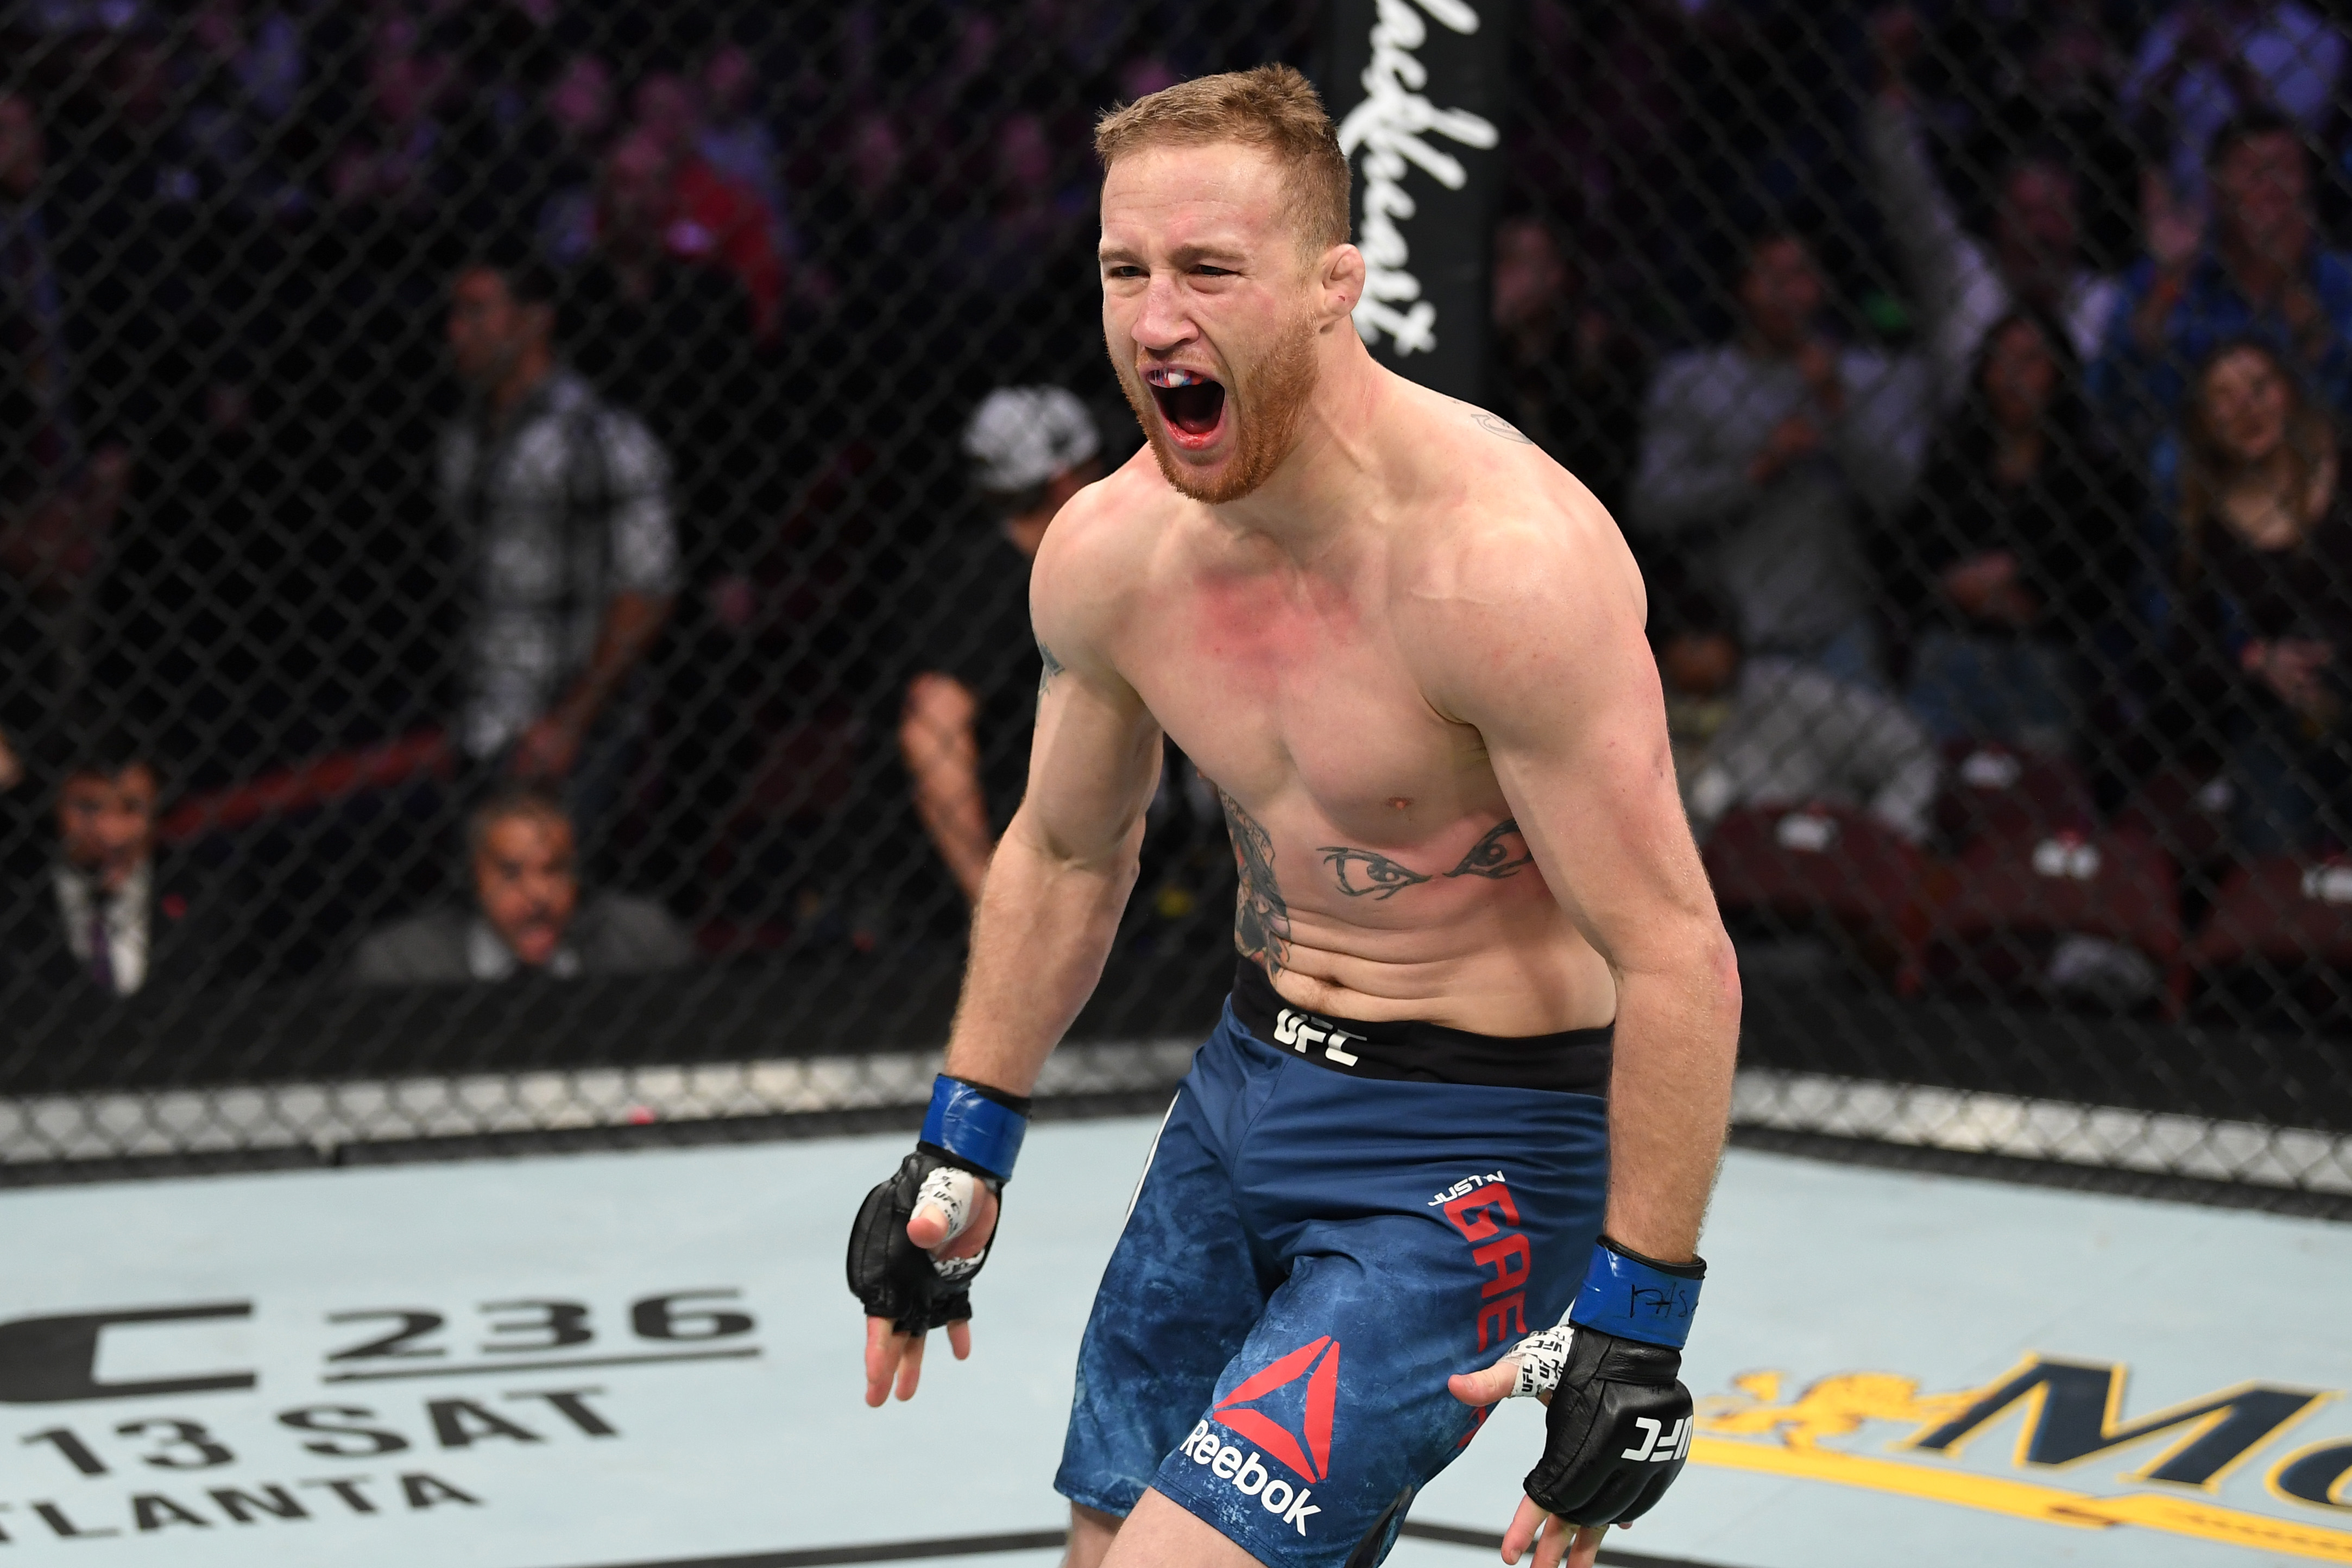 Justin Gaethje reacts after a KO